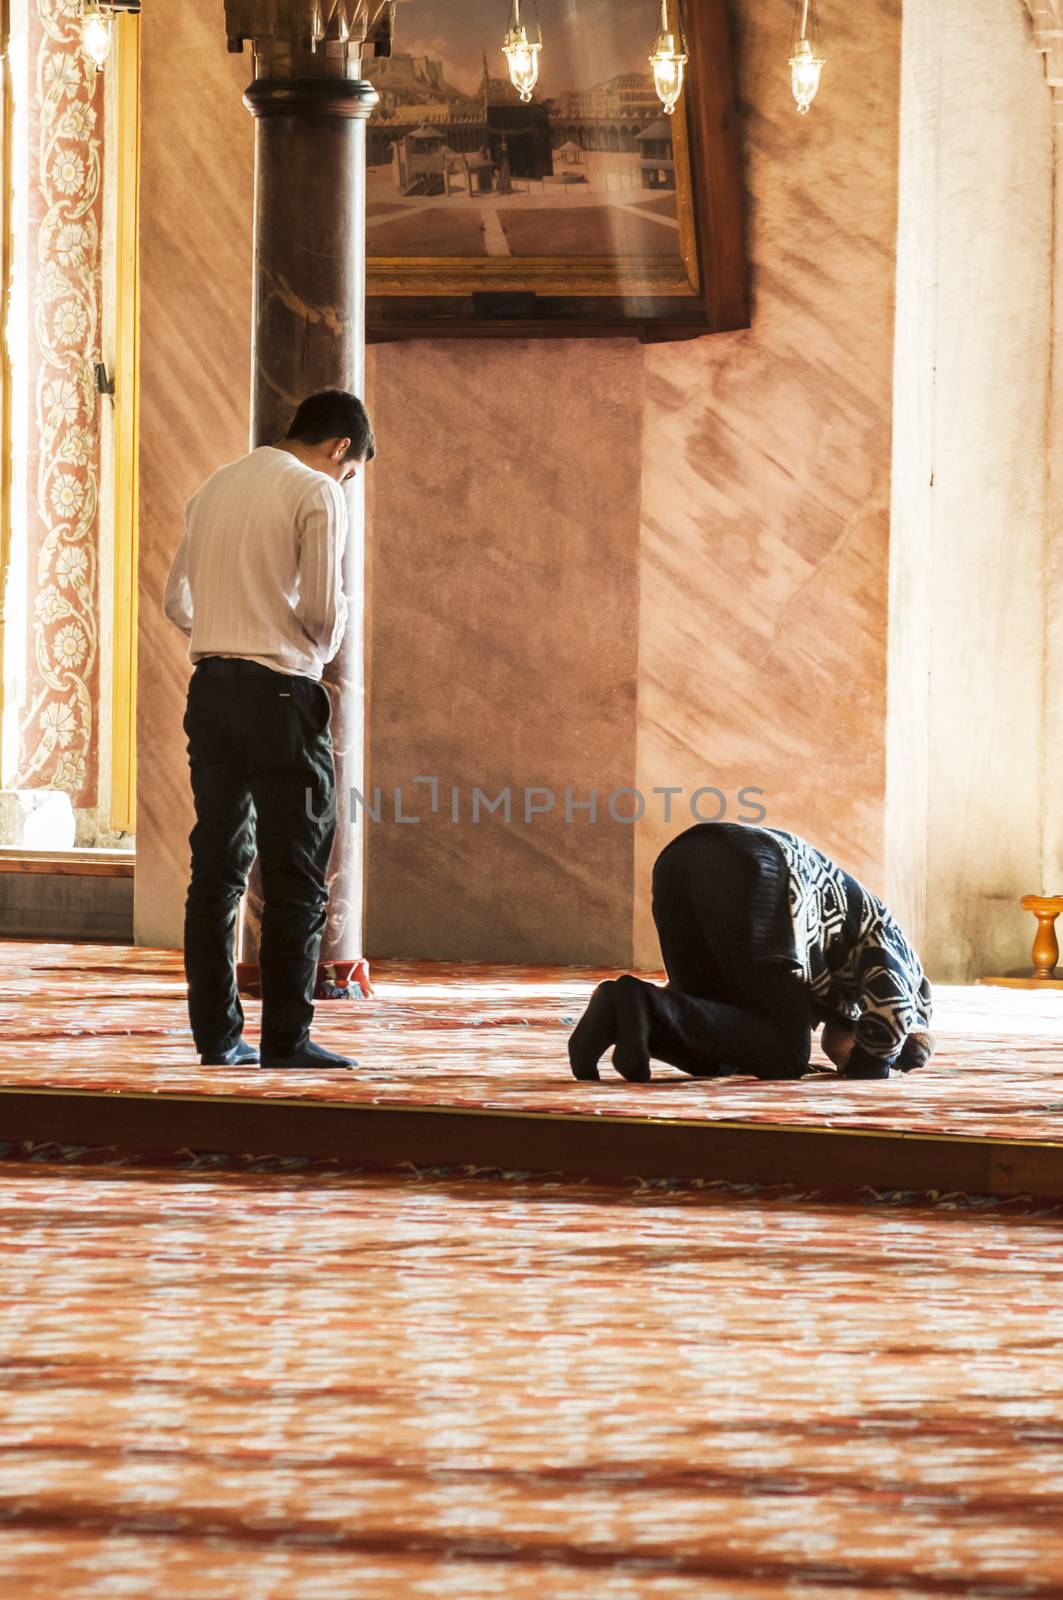 ISTANBUL - FEBRUARY 9: muslims pray inside the Blue Mosque on February 9, 2013 in Istanbul 